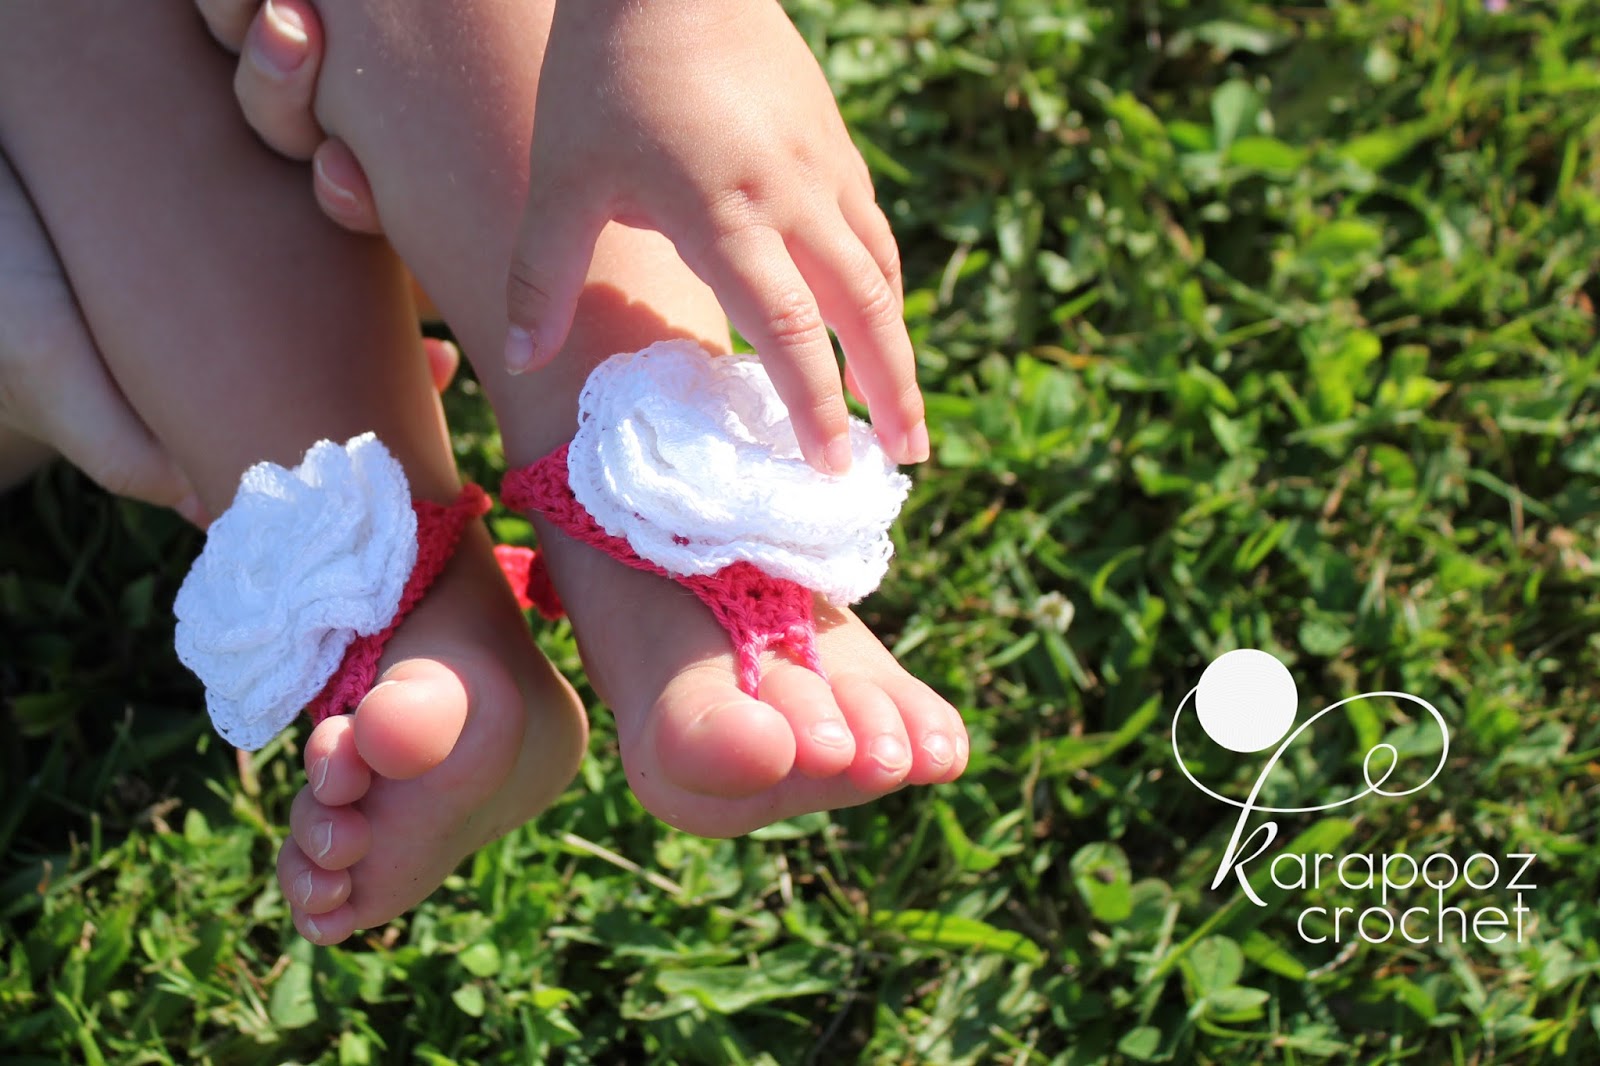 60+ Adorable and FREE Crochet Baby Sandals Patterns --> Baby Barefoot Crochet Sandals